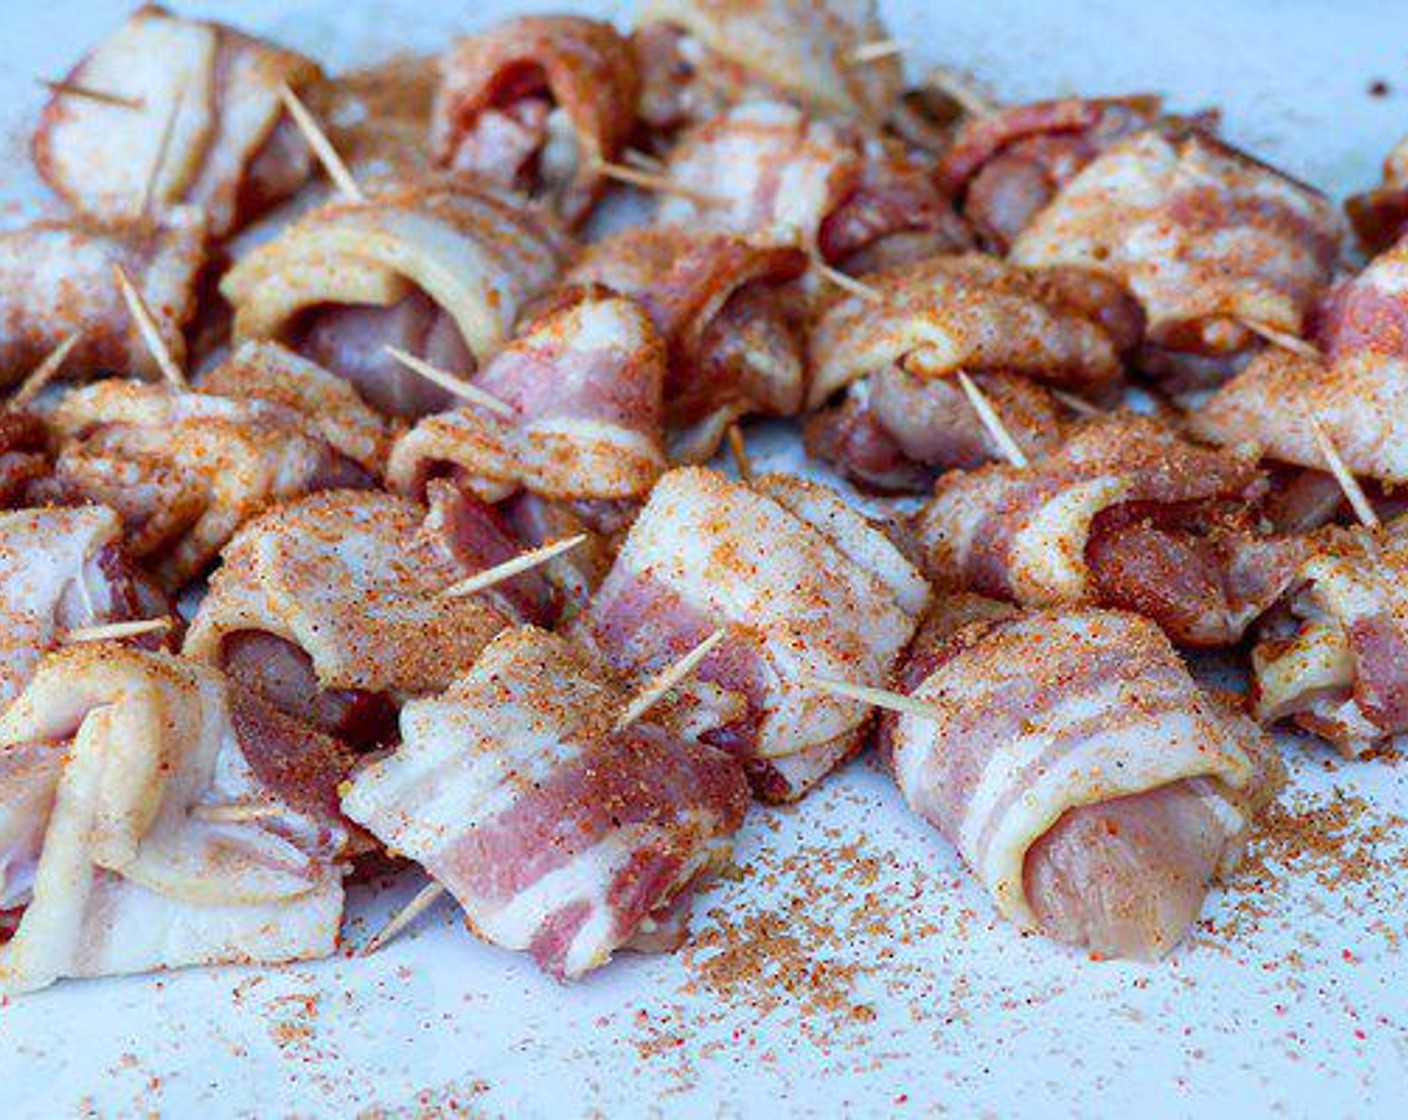 step 3 Combine the Brown Sugar (1/2 cup), Barbecue Rub (2 Tbsp), Cane Sugar (2 Tbsp) and Cayenne Pepper (1/2 tsp) in a small bowl and sprinkle over all sides of the bacon-wrapped chicken.